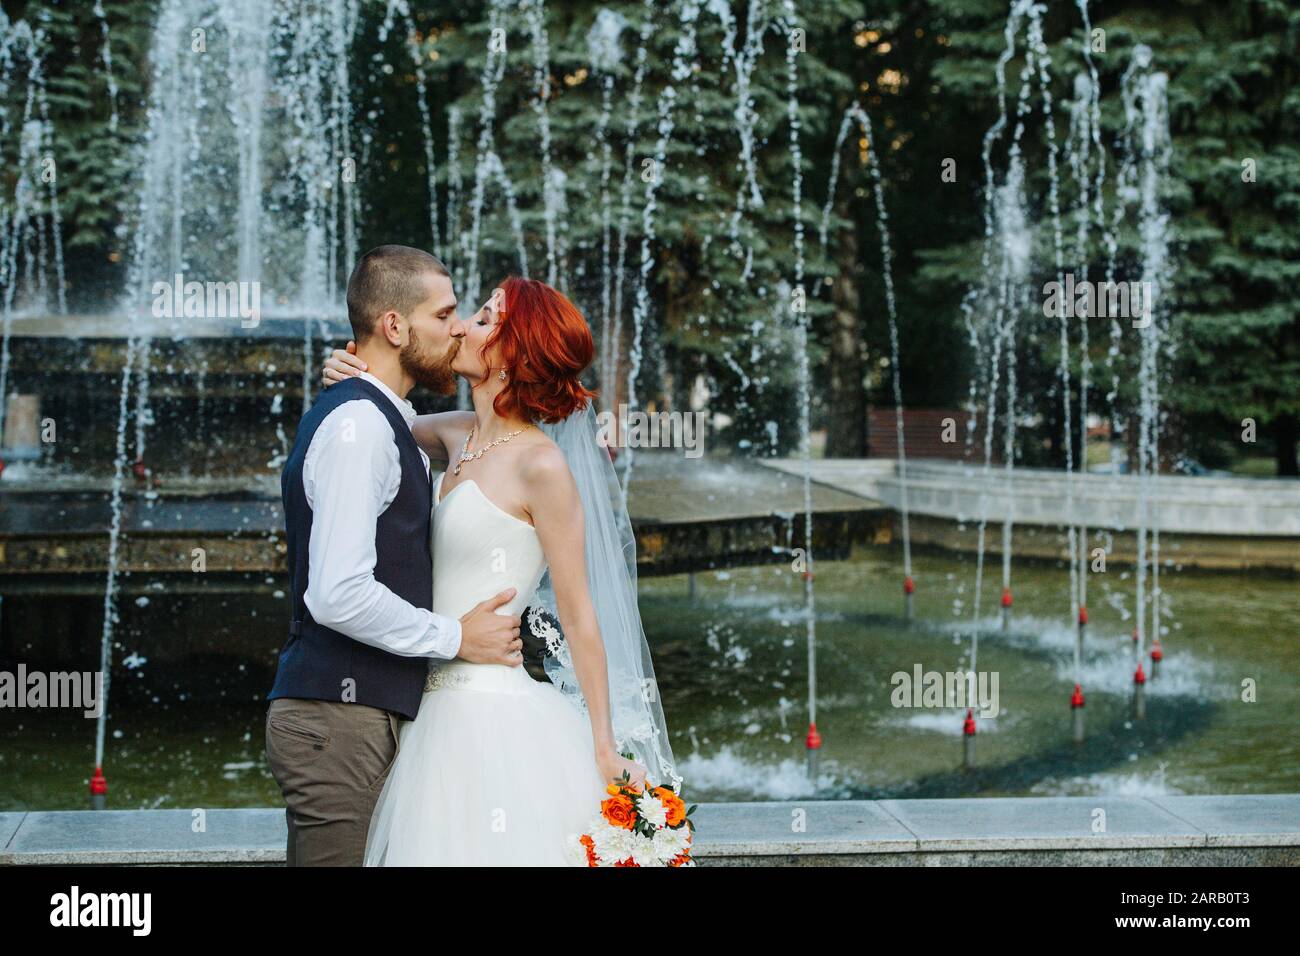 The bride and groom kissing in front of a fountain. Stock Photo